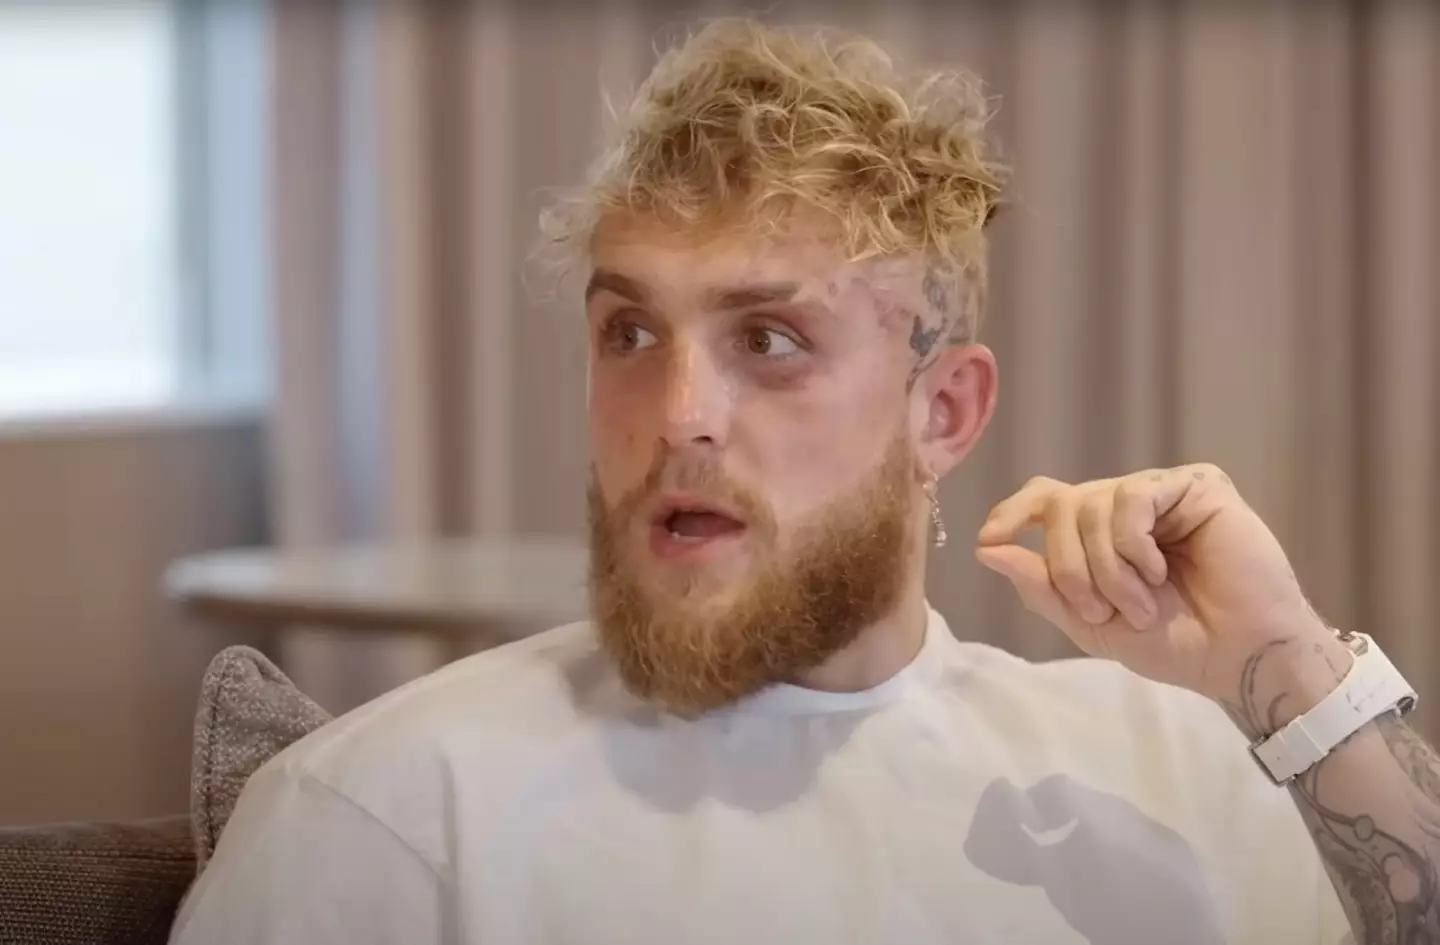 Jake Paul was shut down by his brother.